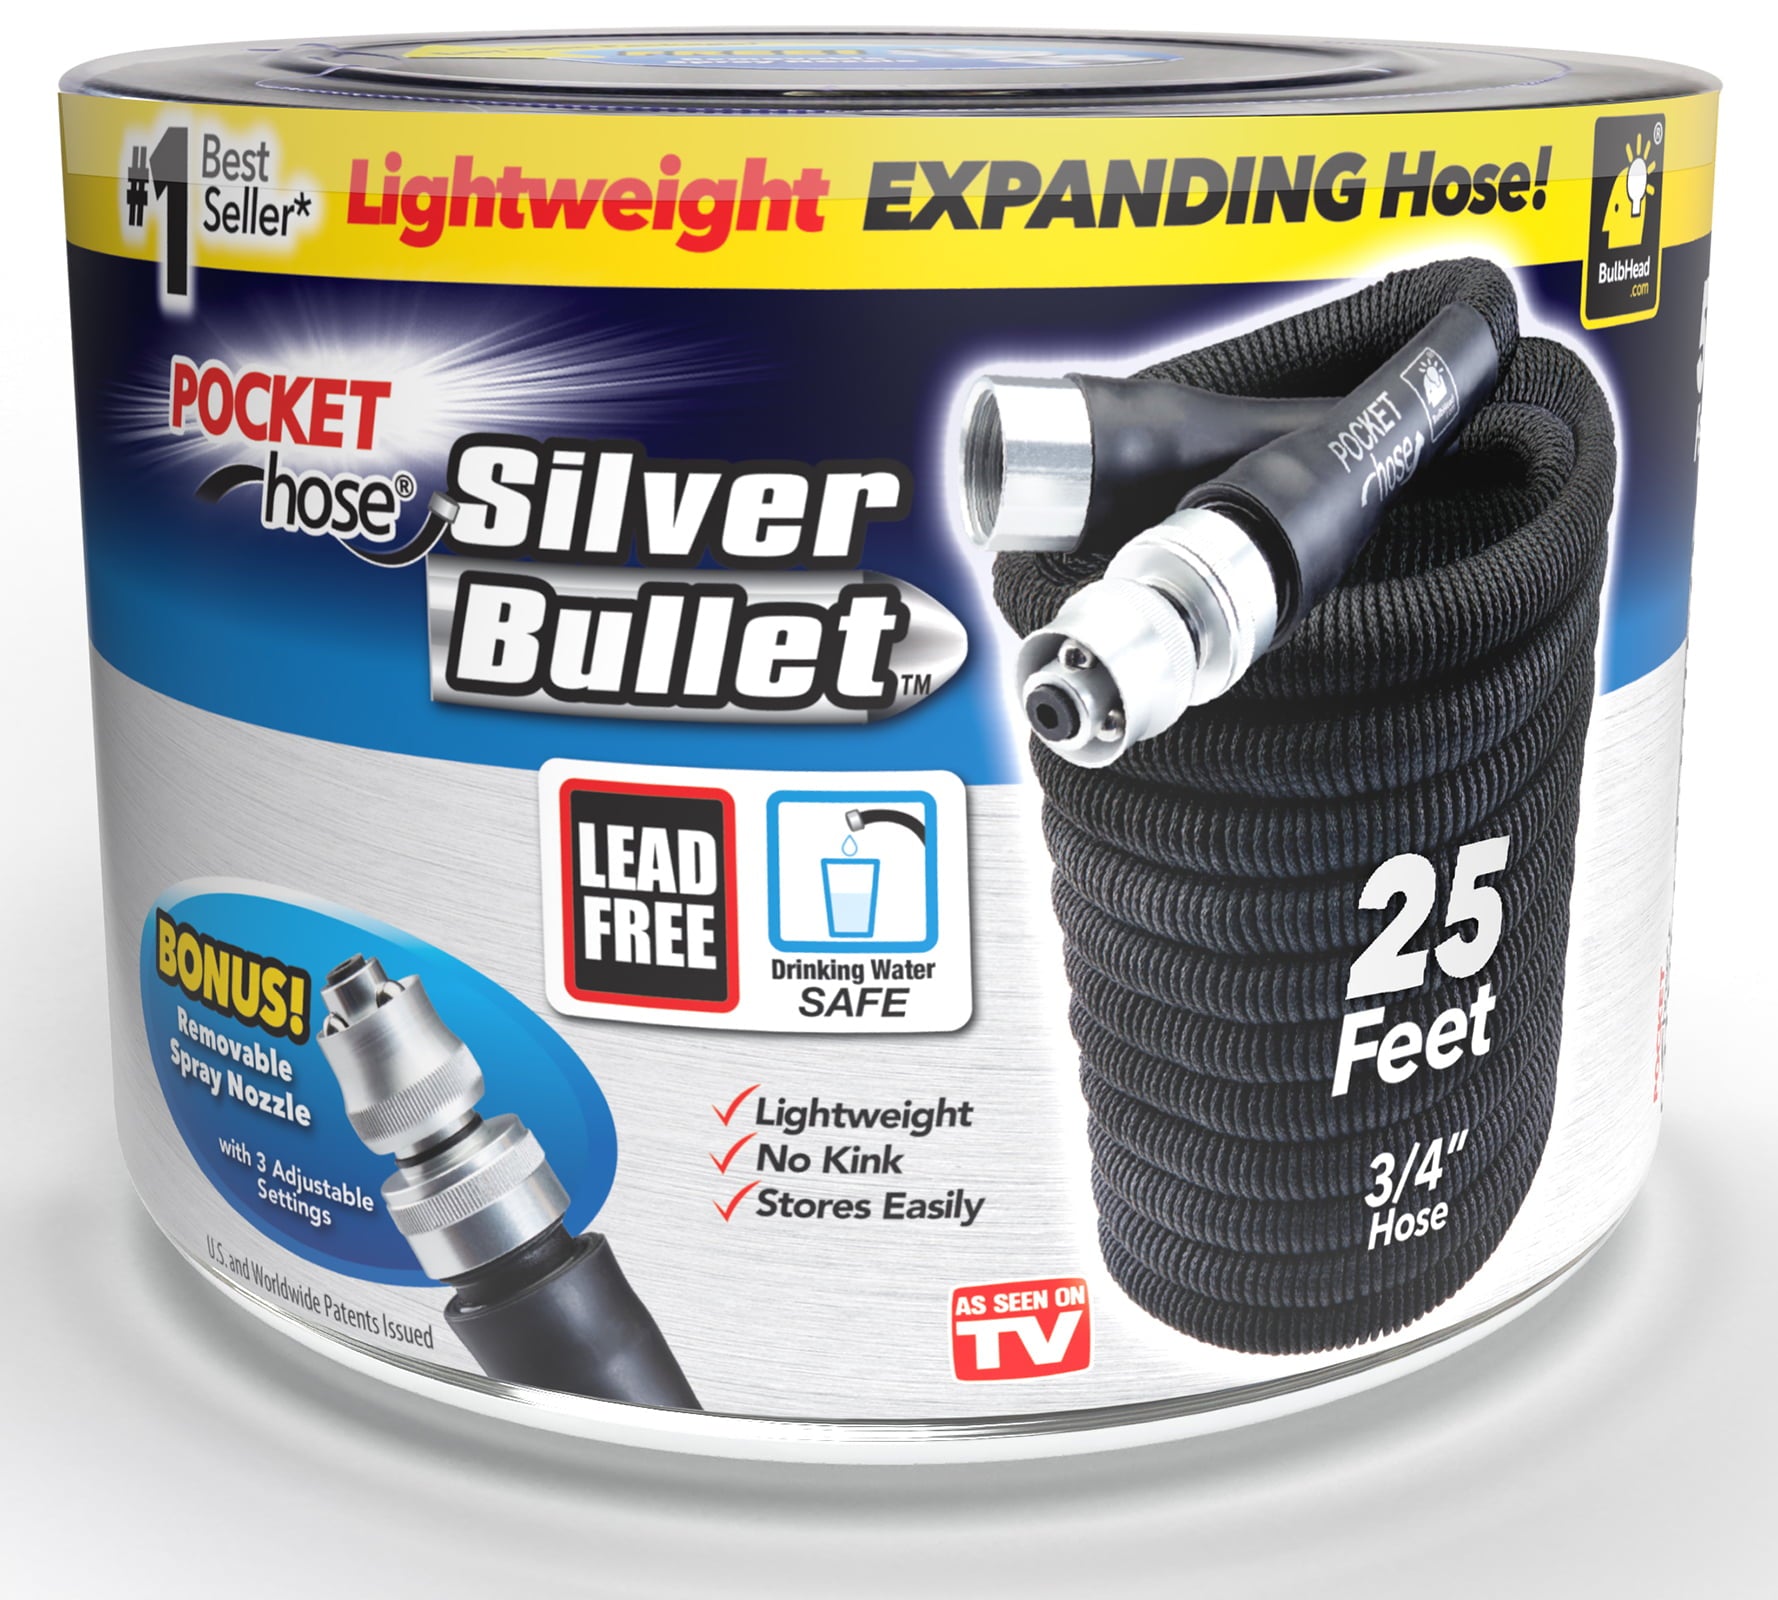 Pocket Hose Original Silver Bullet Water Hose by BulbHead - Expandable Garden Hose That Grows with Lead-Free Aluminum Connectors - Safe Drinking Water Hose (25Feet)